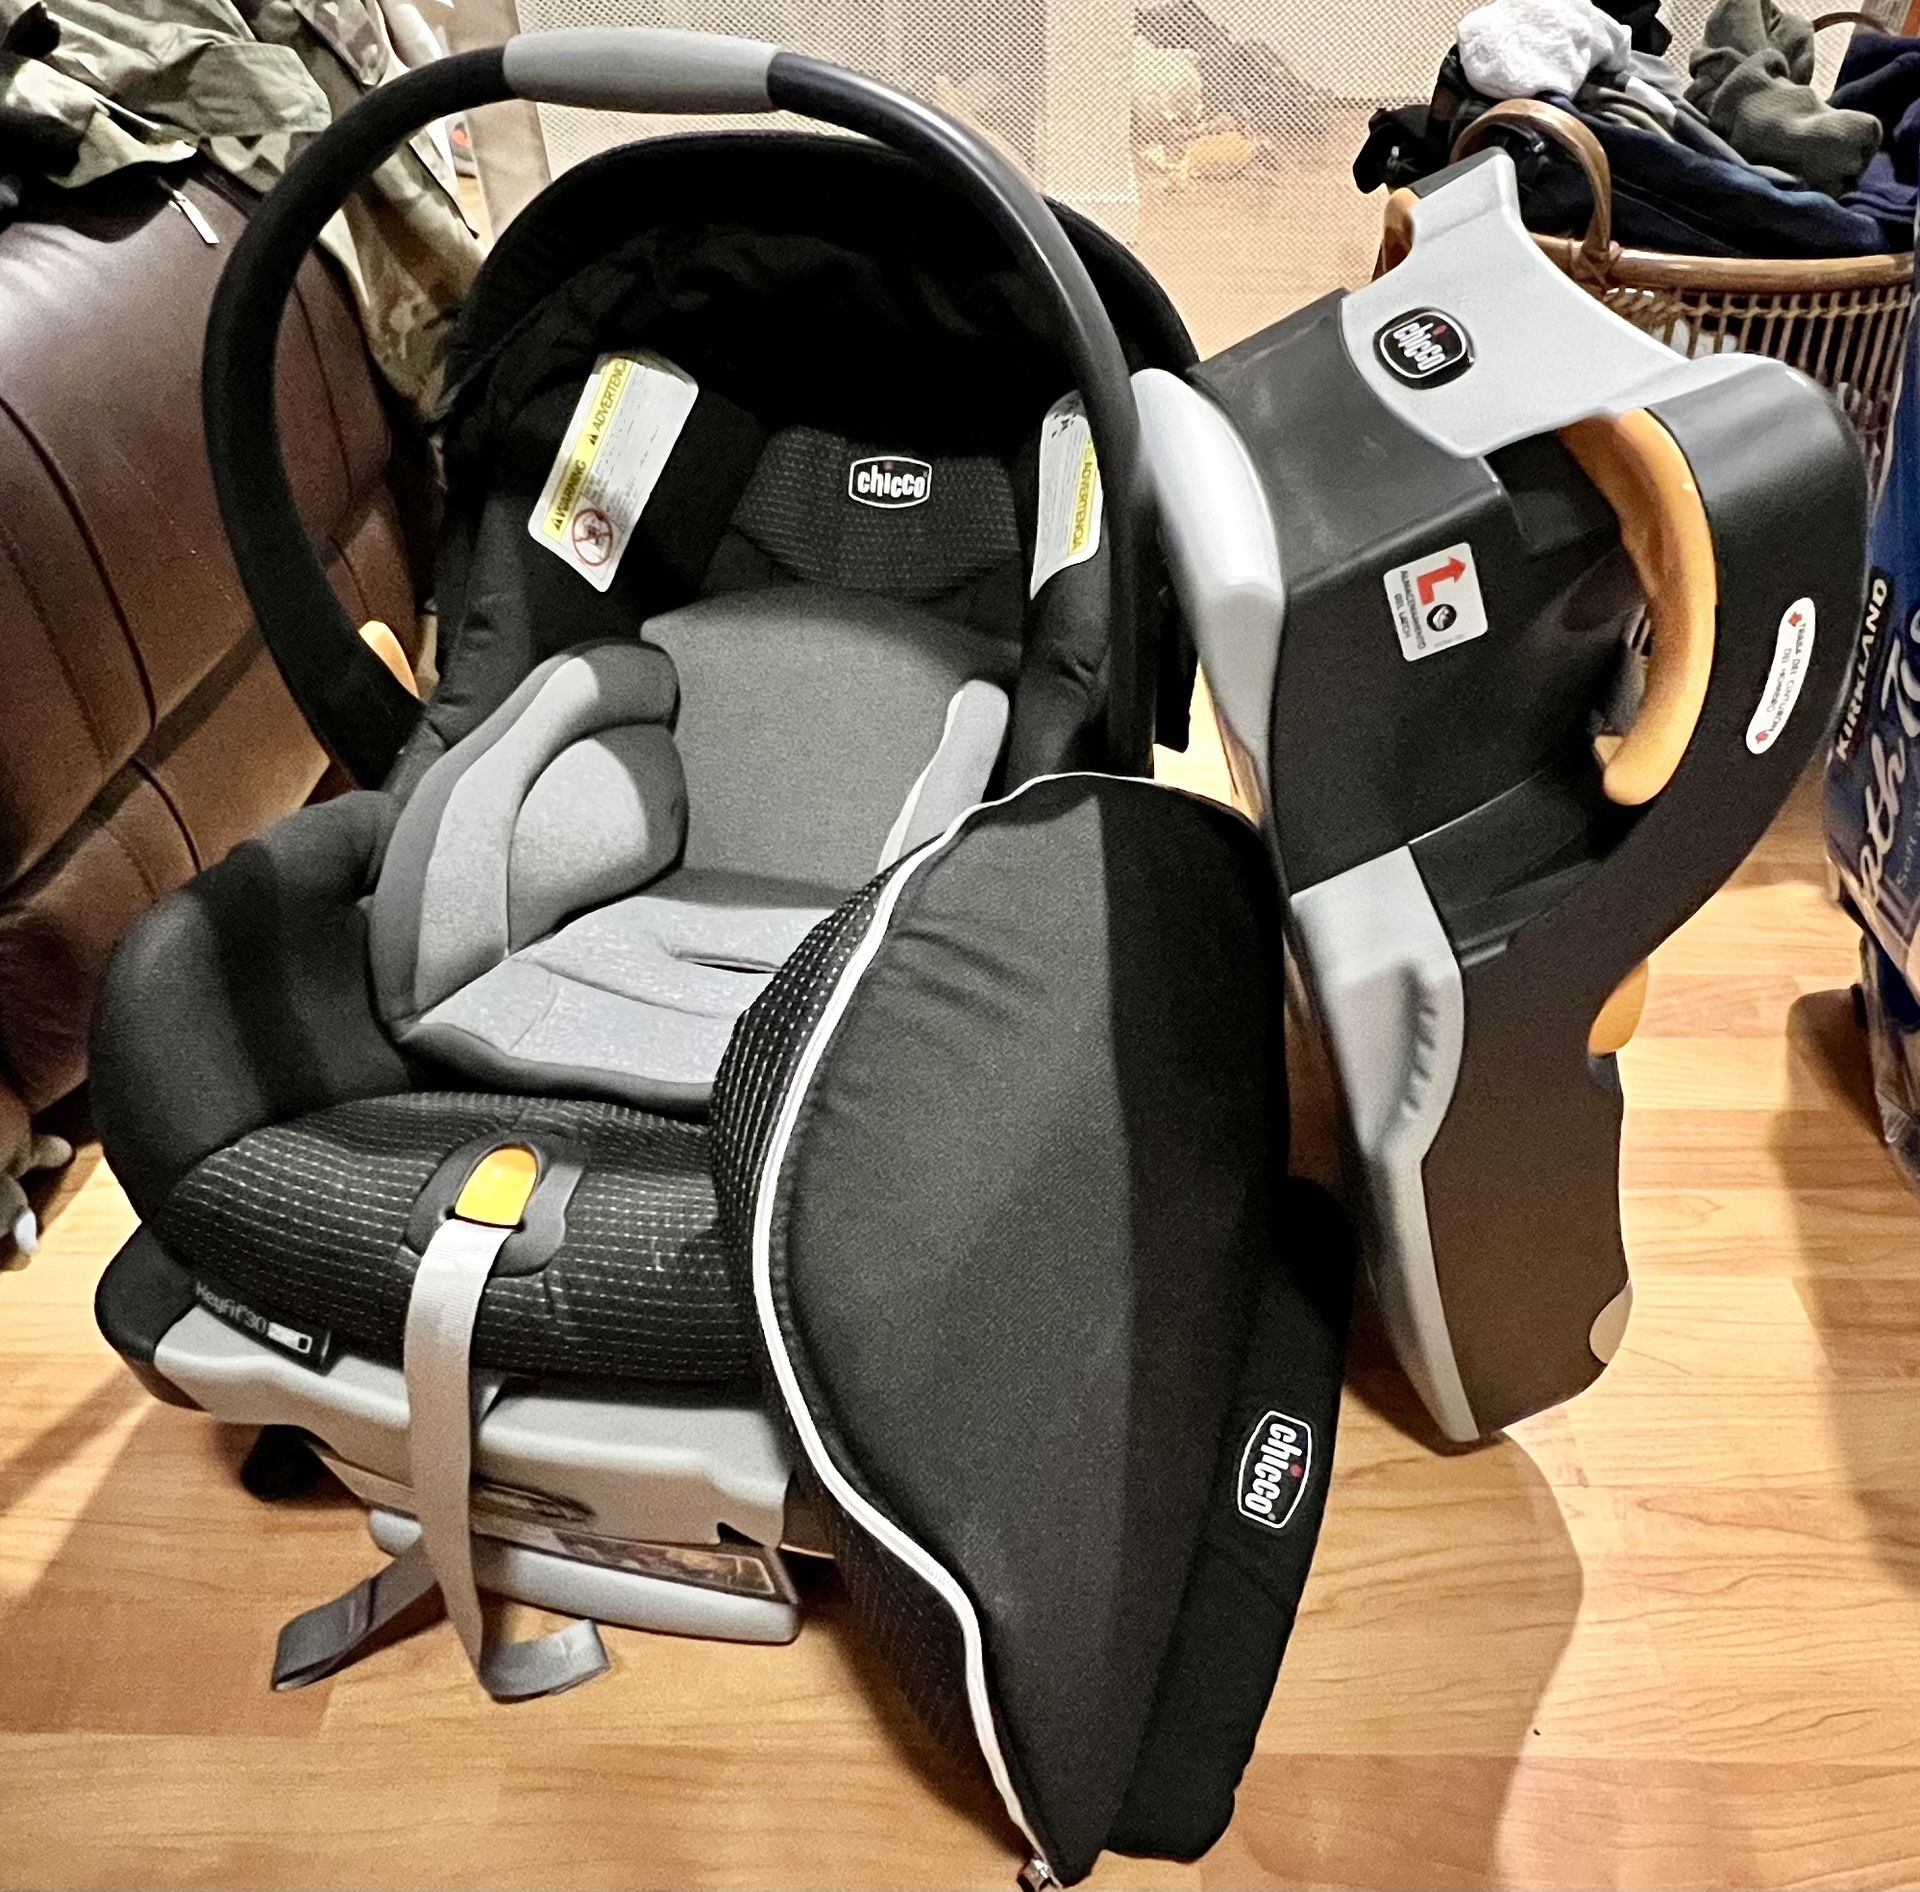 Chicco KeyFit 30 Infant Car Seat Bases for Sale in Honolulu, HI  OfferUp